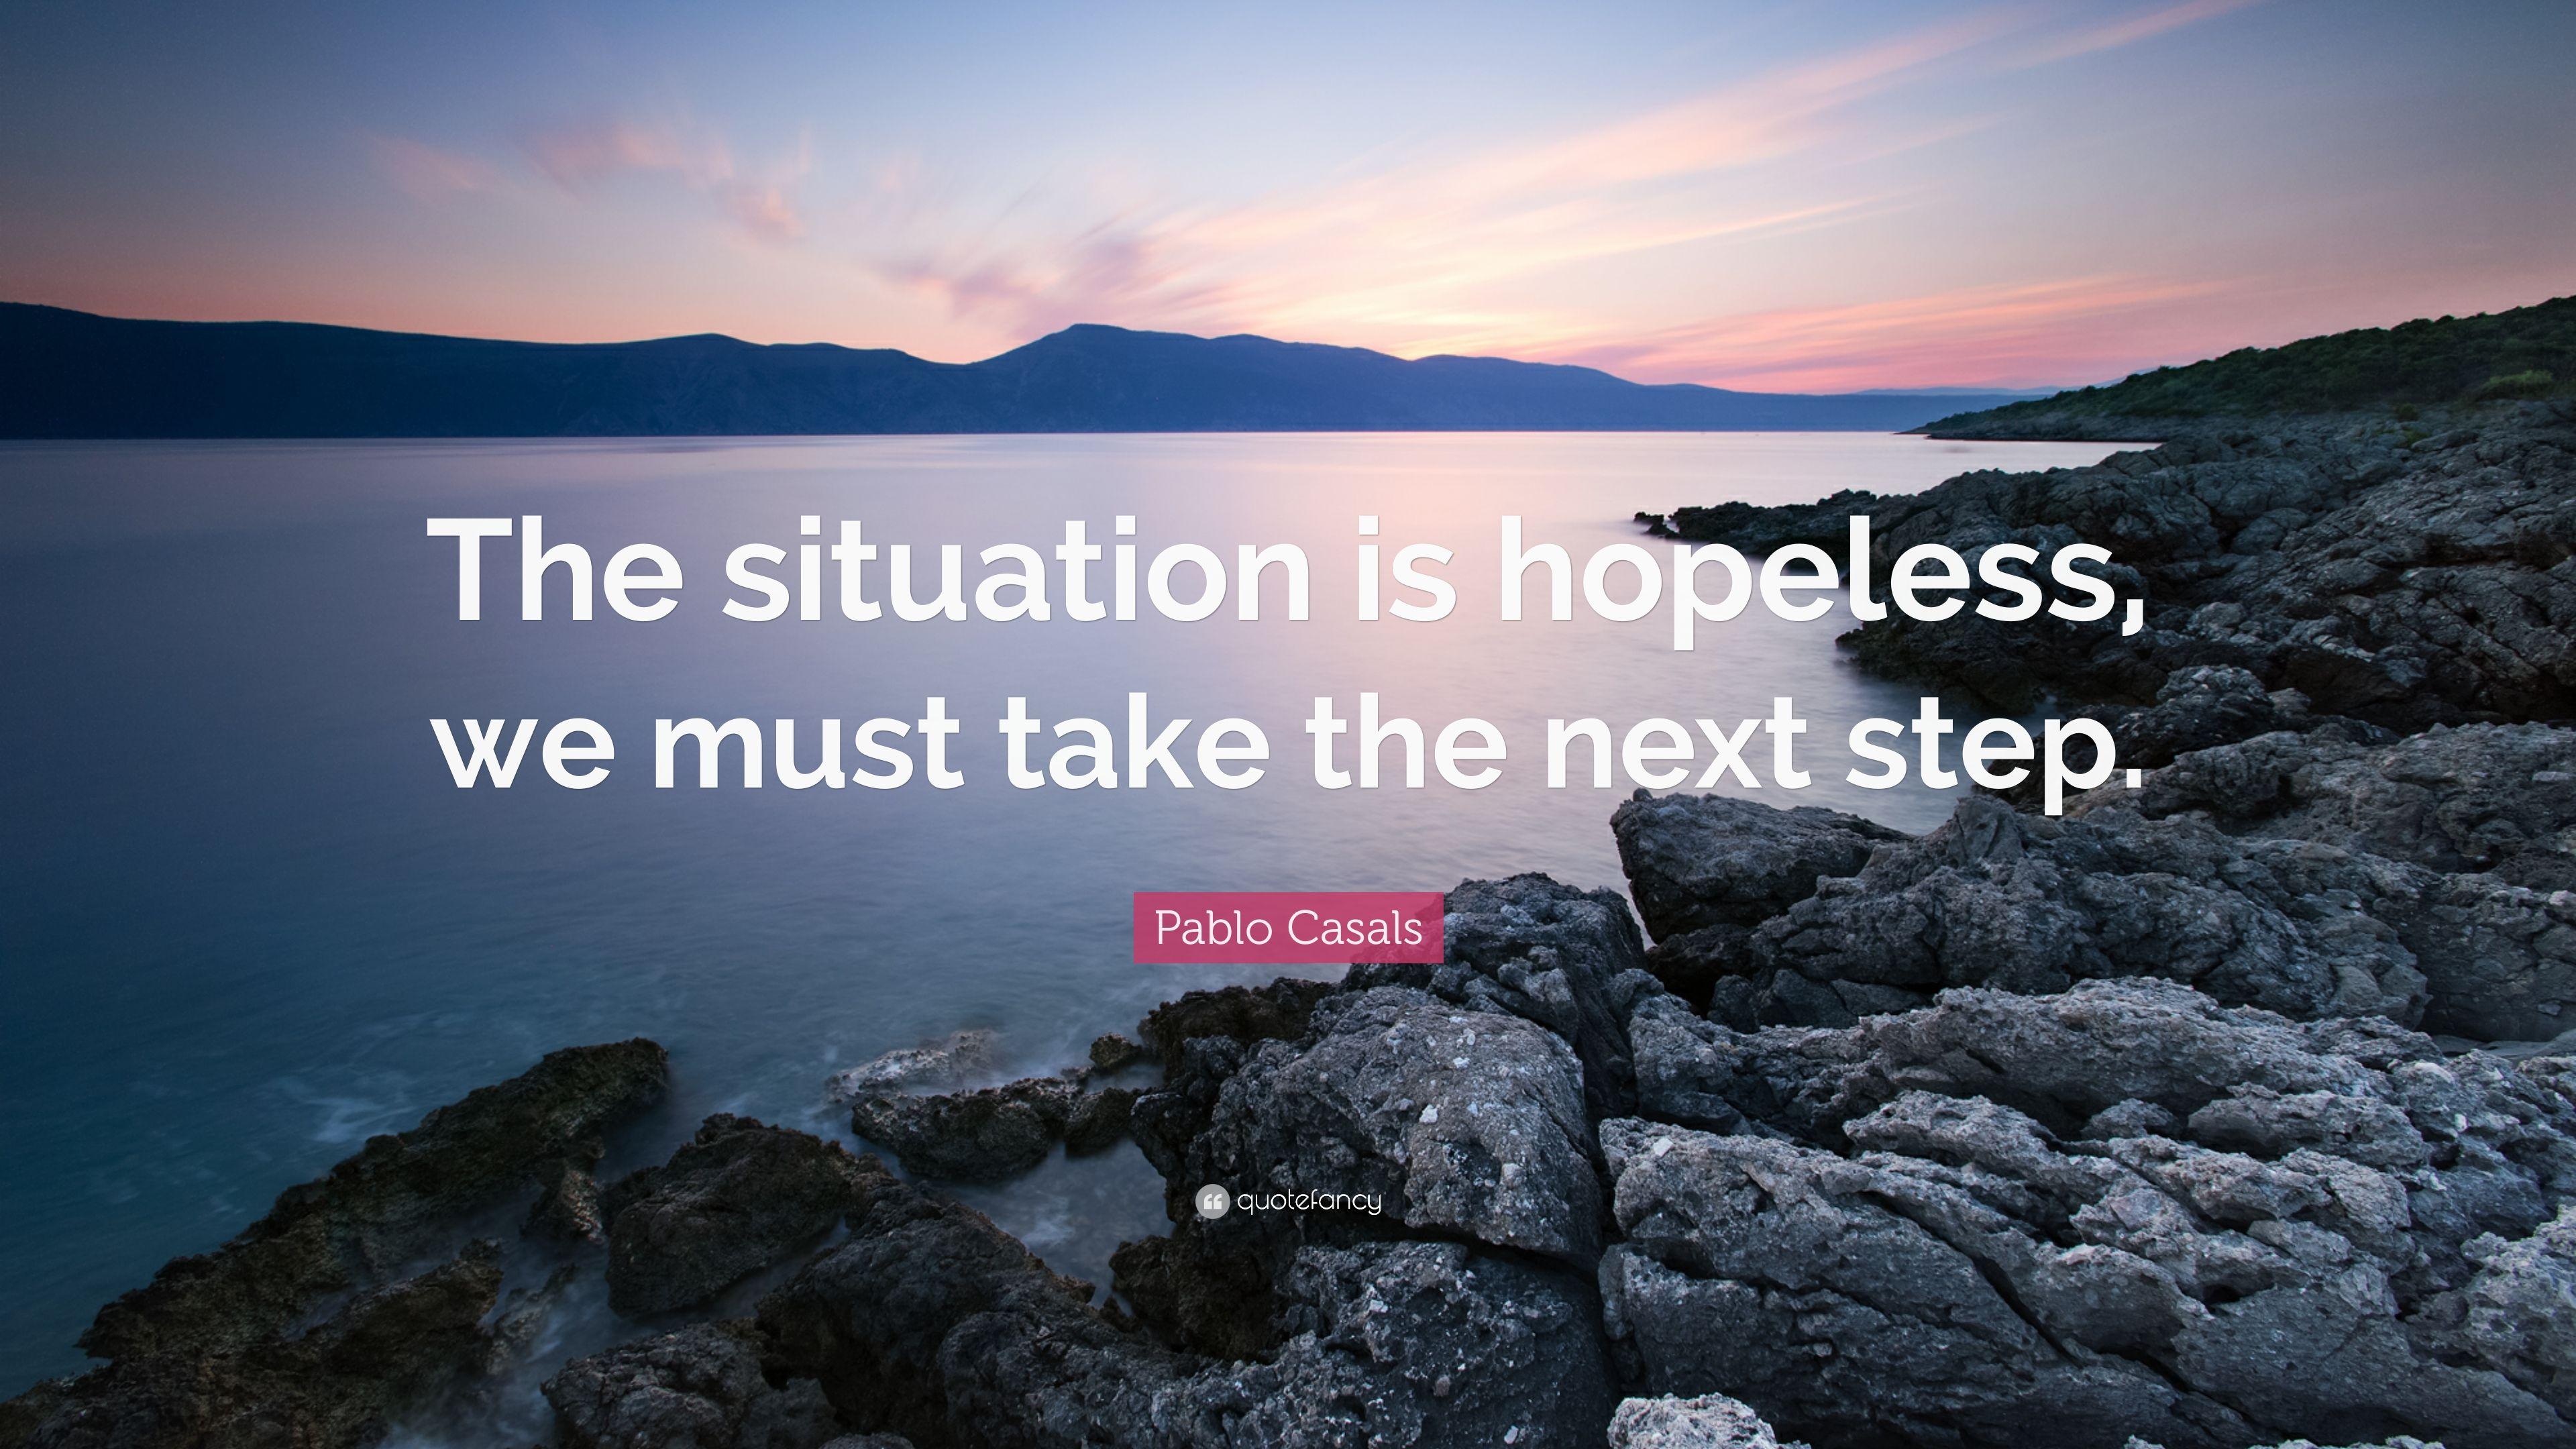 Pablo Casals Quote: “The situation is hopeless, we must take